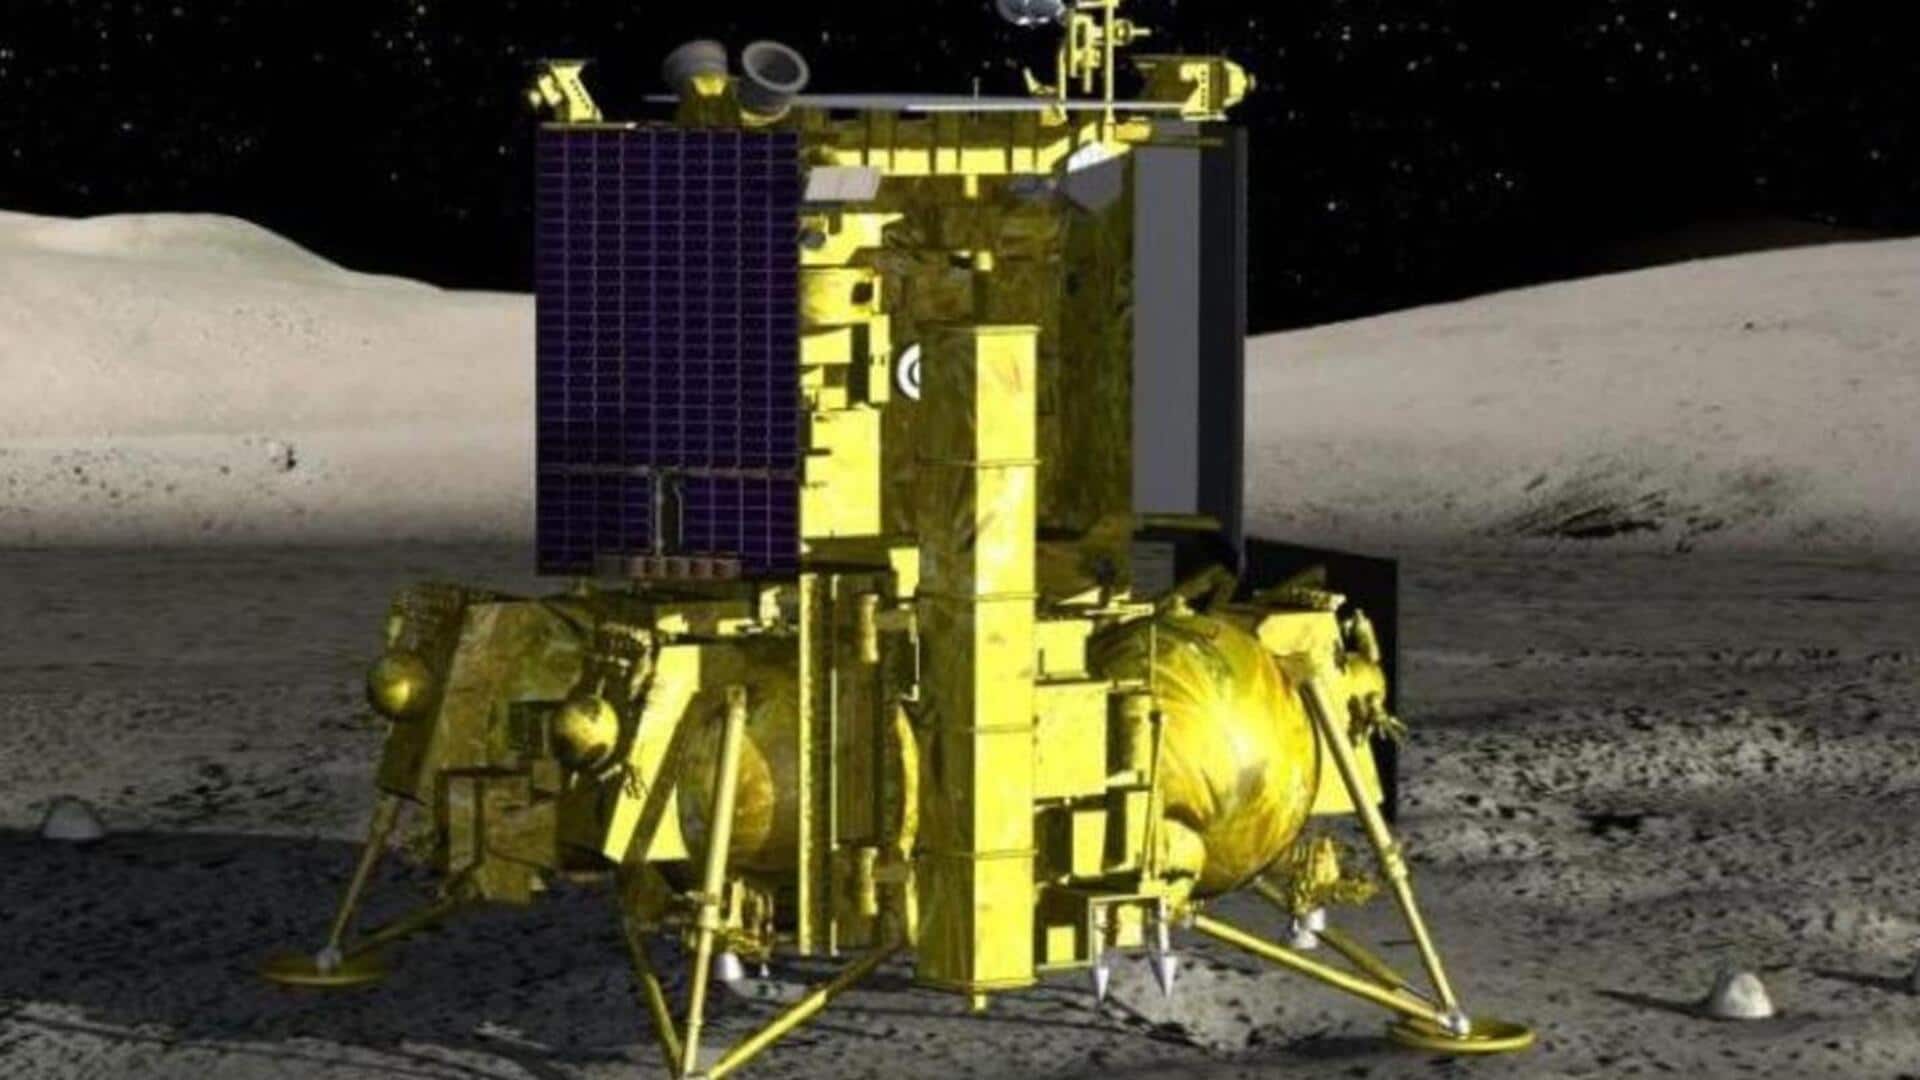 What went wrong with Russia's Luna-25 Moon mission